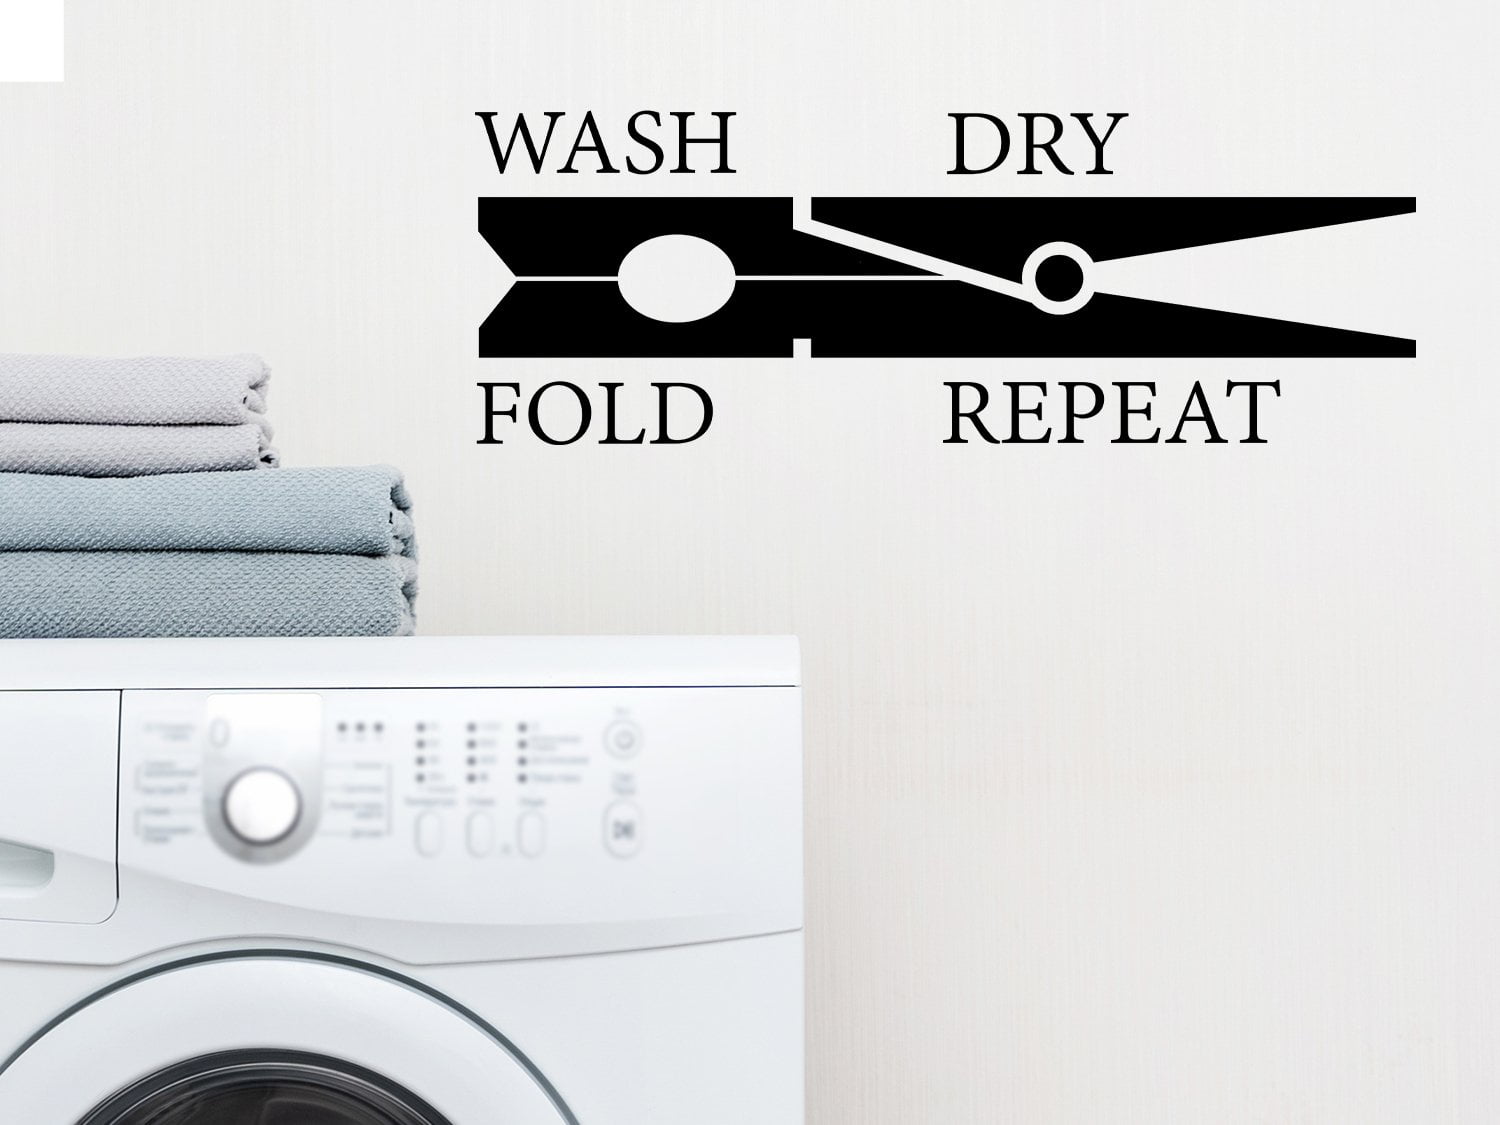 Clothespin Laundry Room Vinyl Wall Sticker Decal 6"w x 22"h 